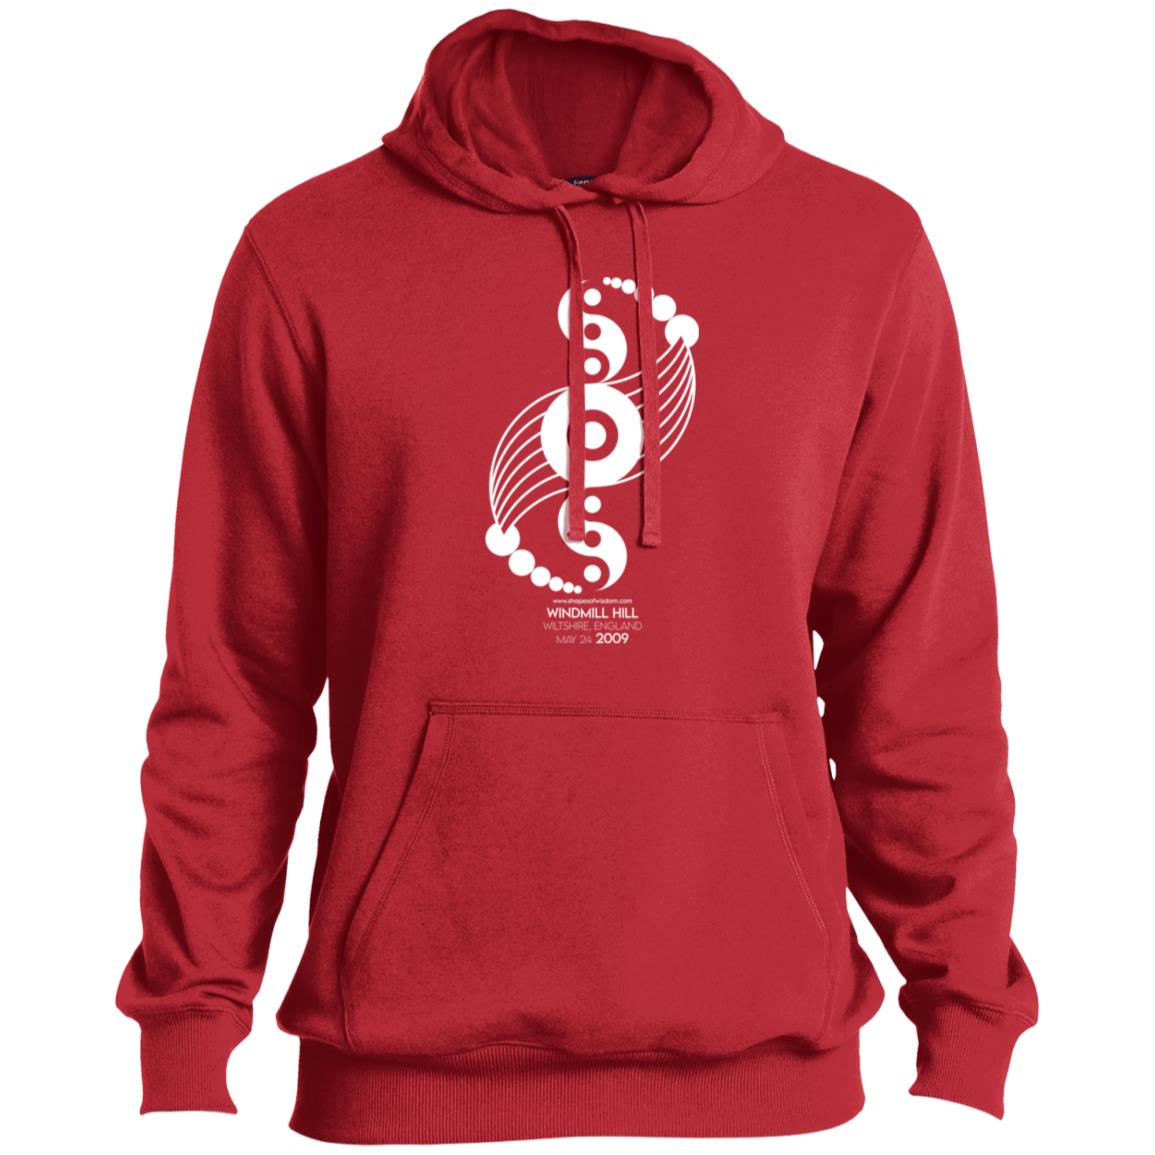 Crop Circle Pullover Hoodie - Windmill Hill 3